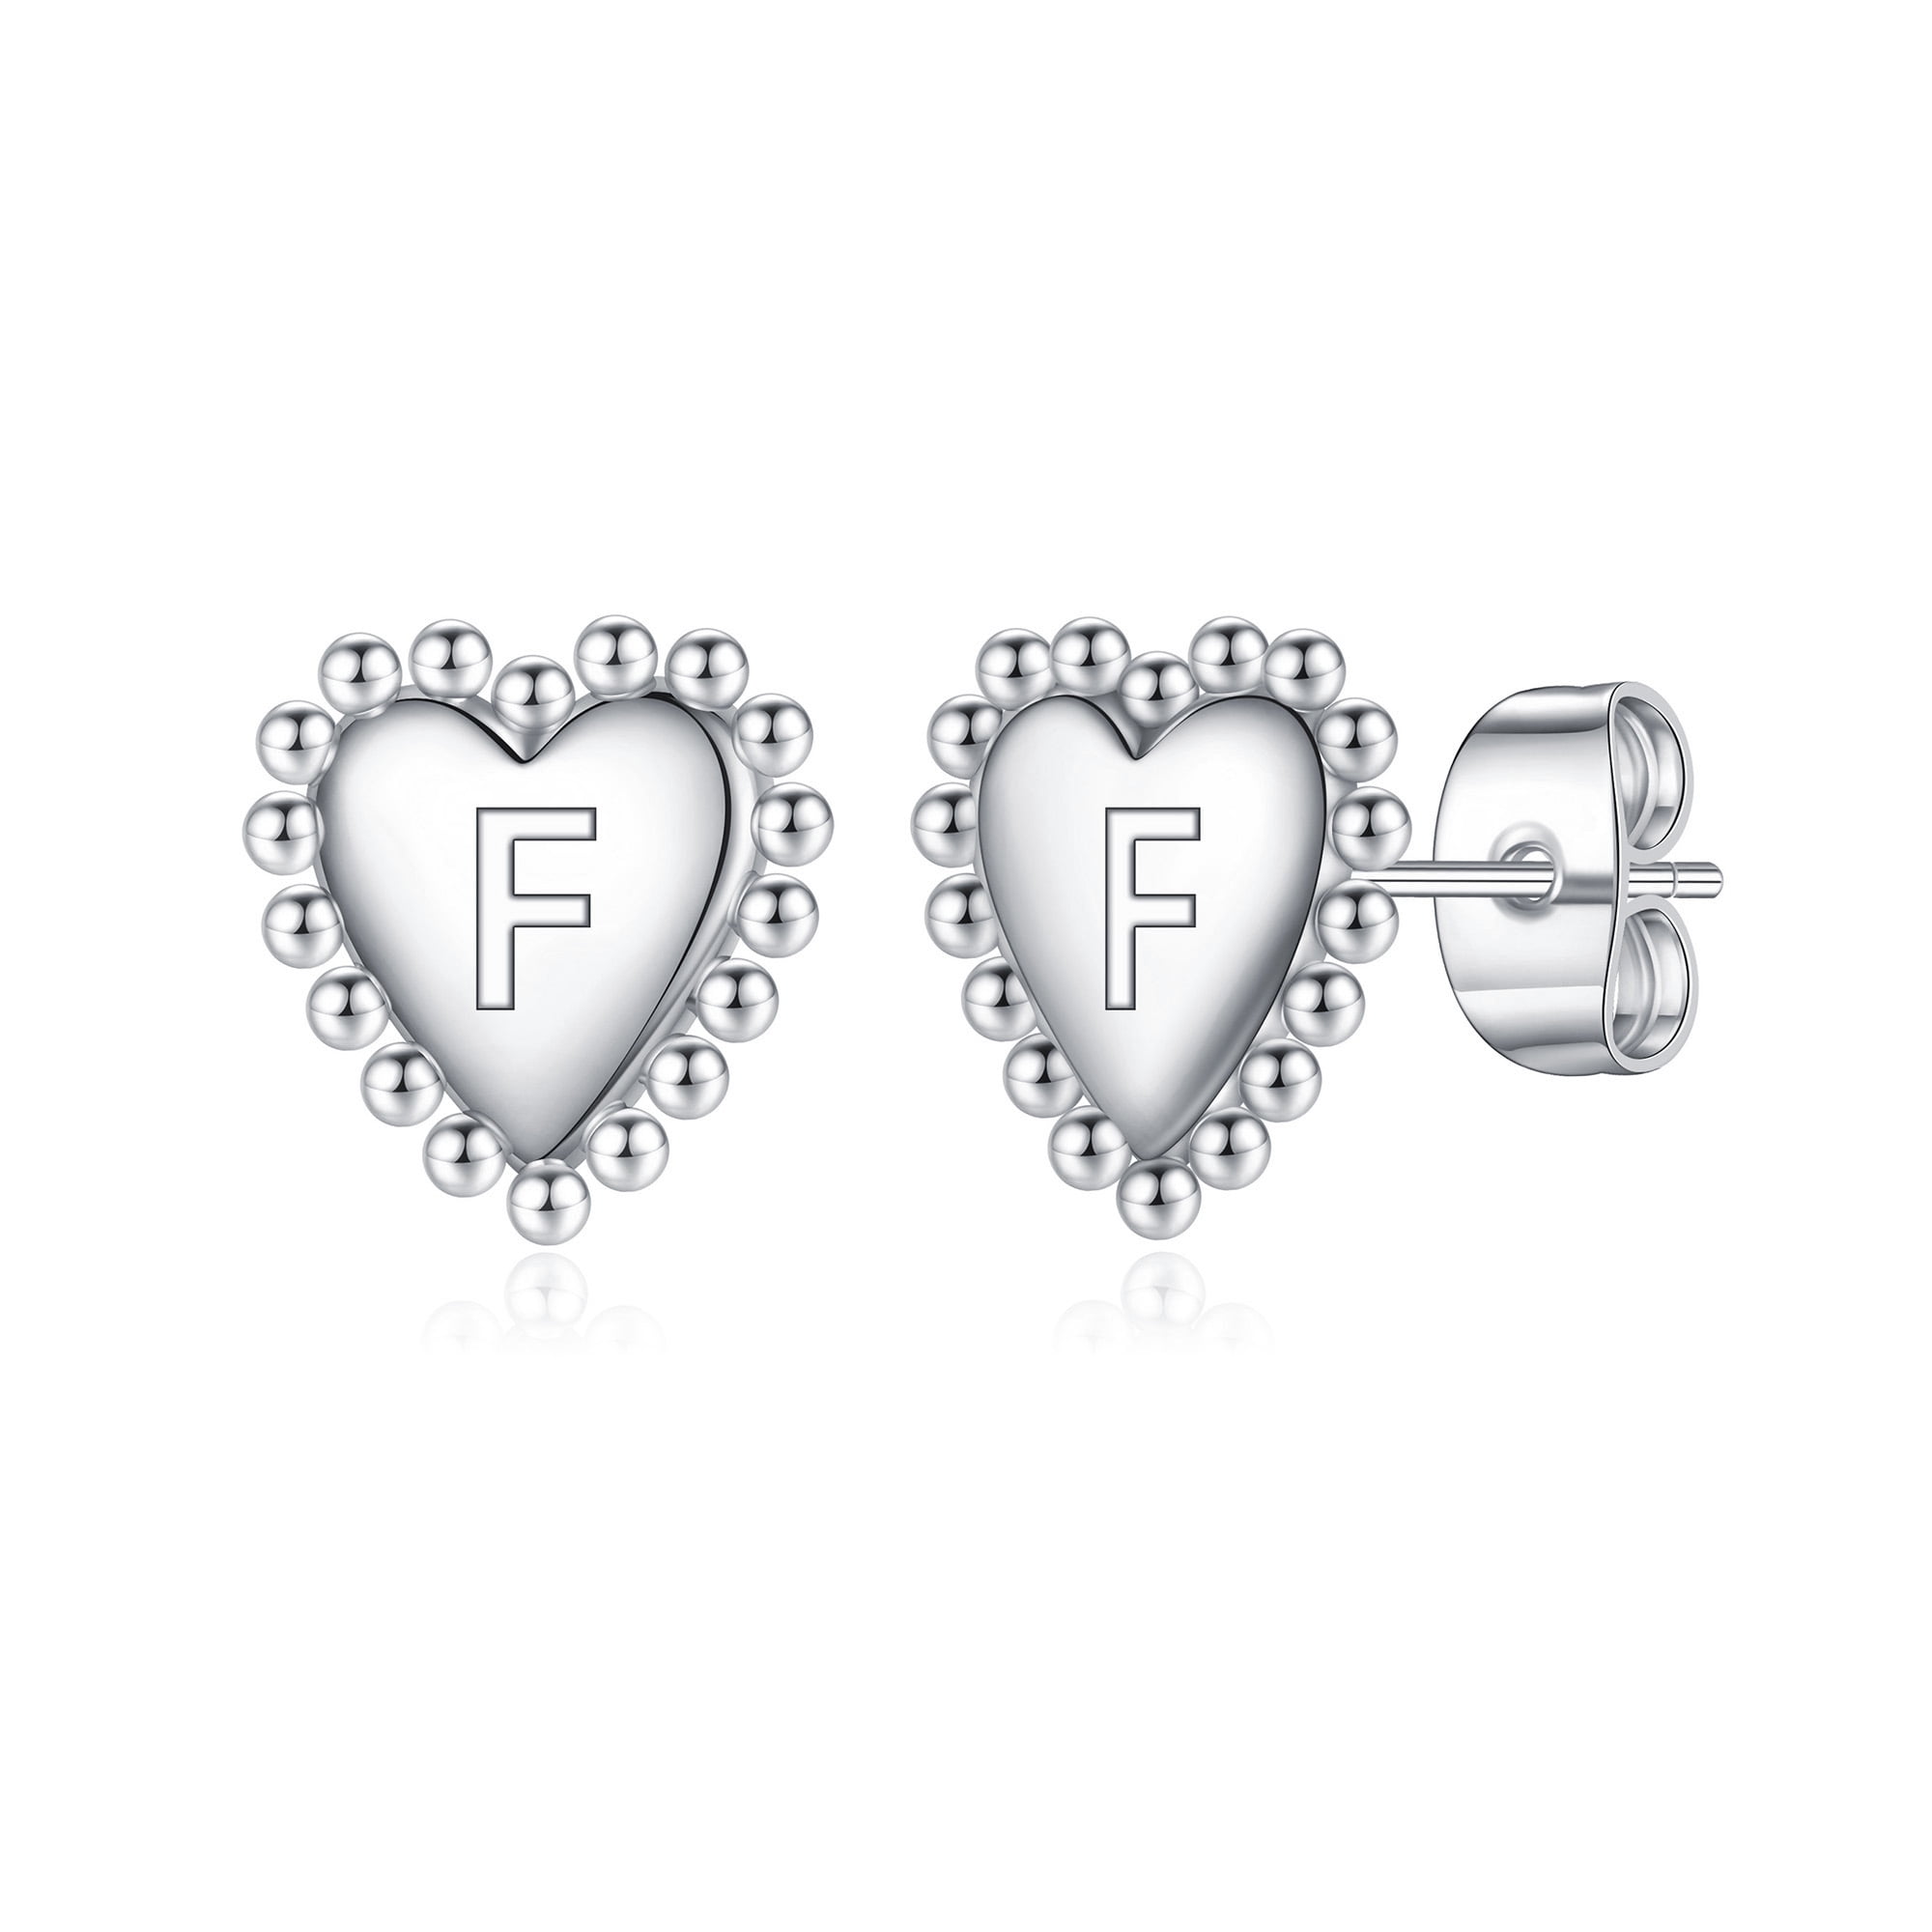 Details about  / 925 Sterling Silver Ladies Earrings CZ Love Heart Cubic Zirconia